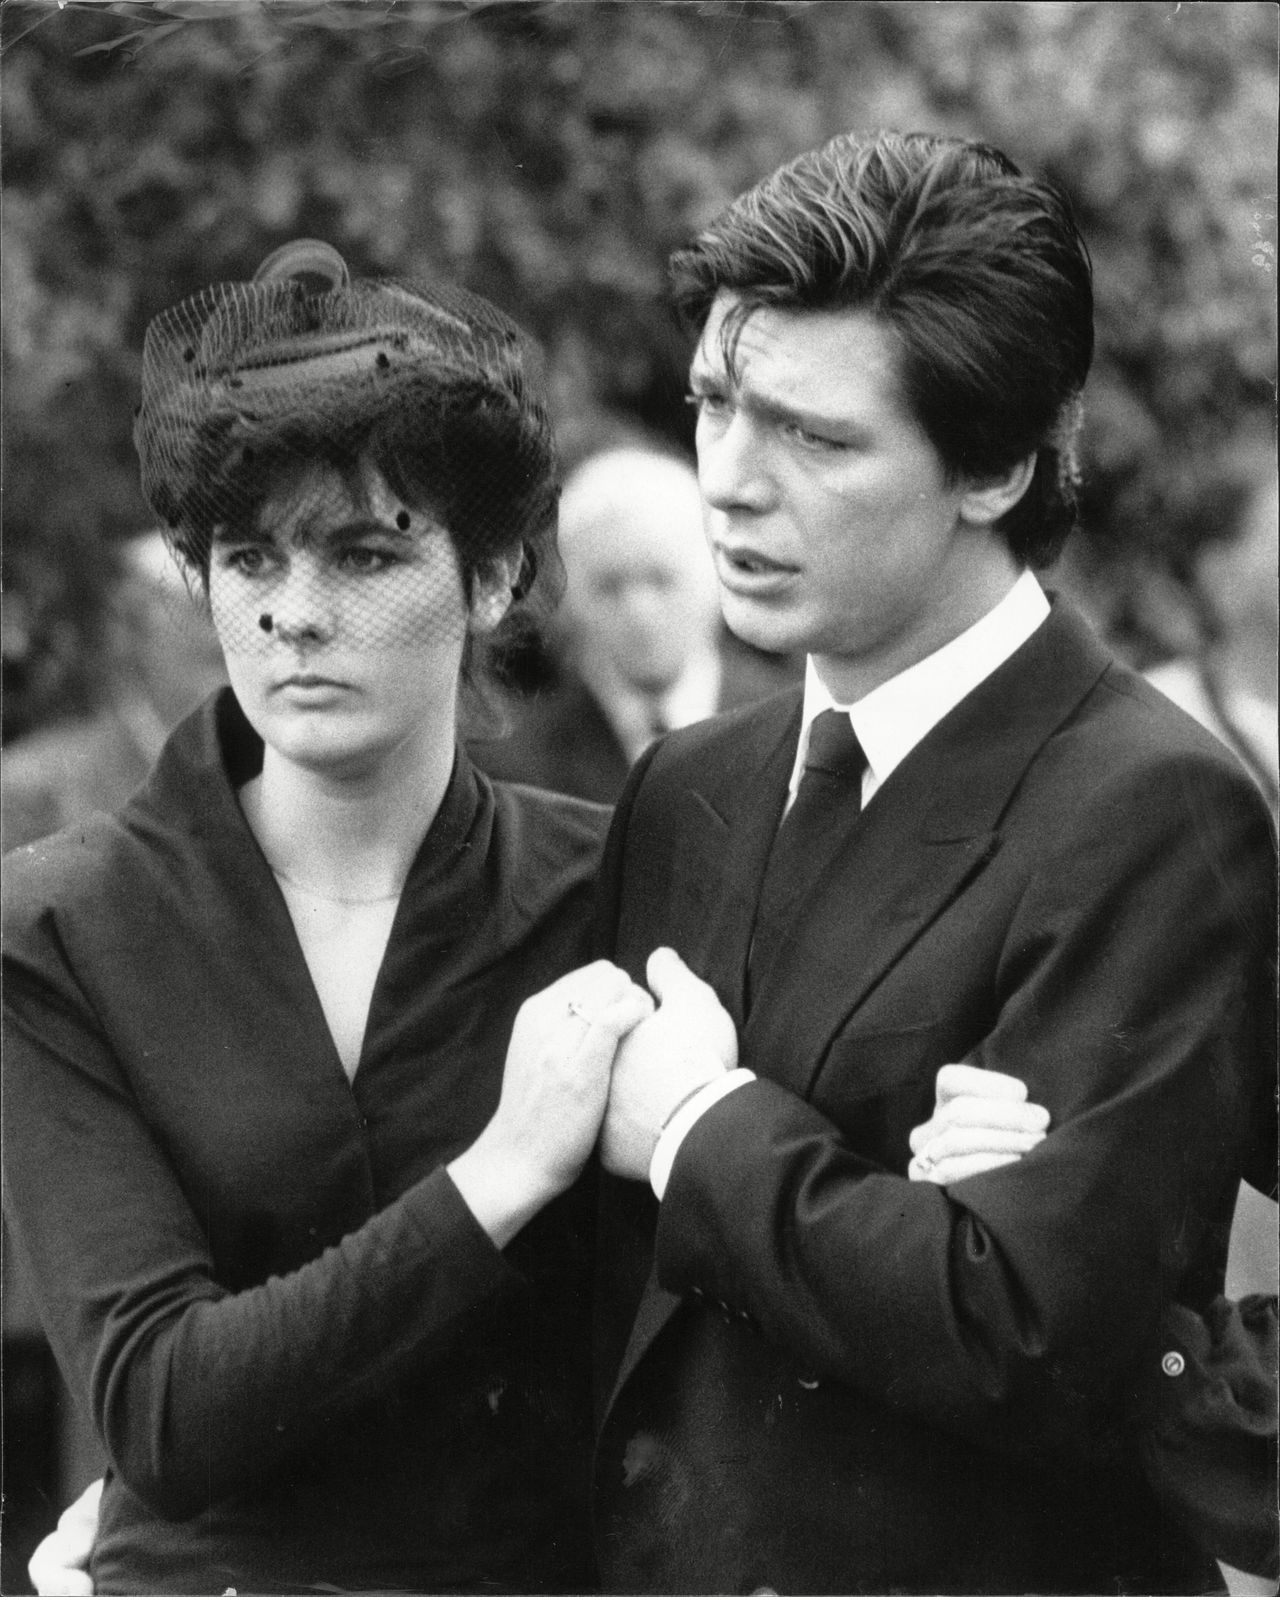 Jeremy Bamber with his girlfriend Julie Mugford at the funeral for his adoptive parents Nevill and June, sister Sheila and nephews Daniel and Nicholas